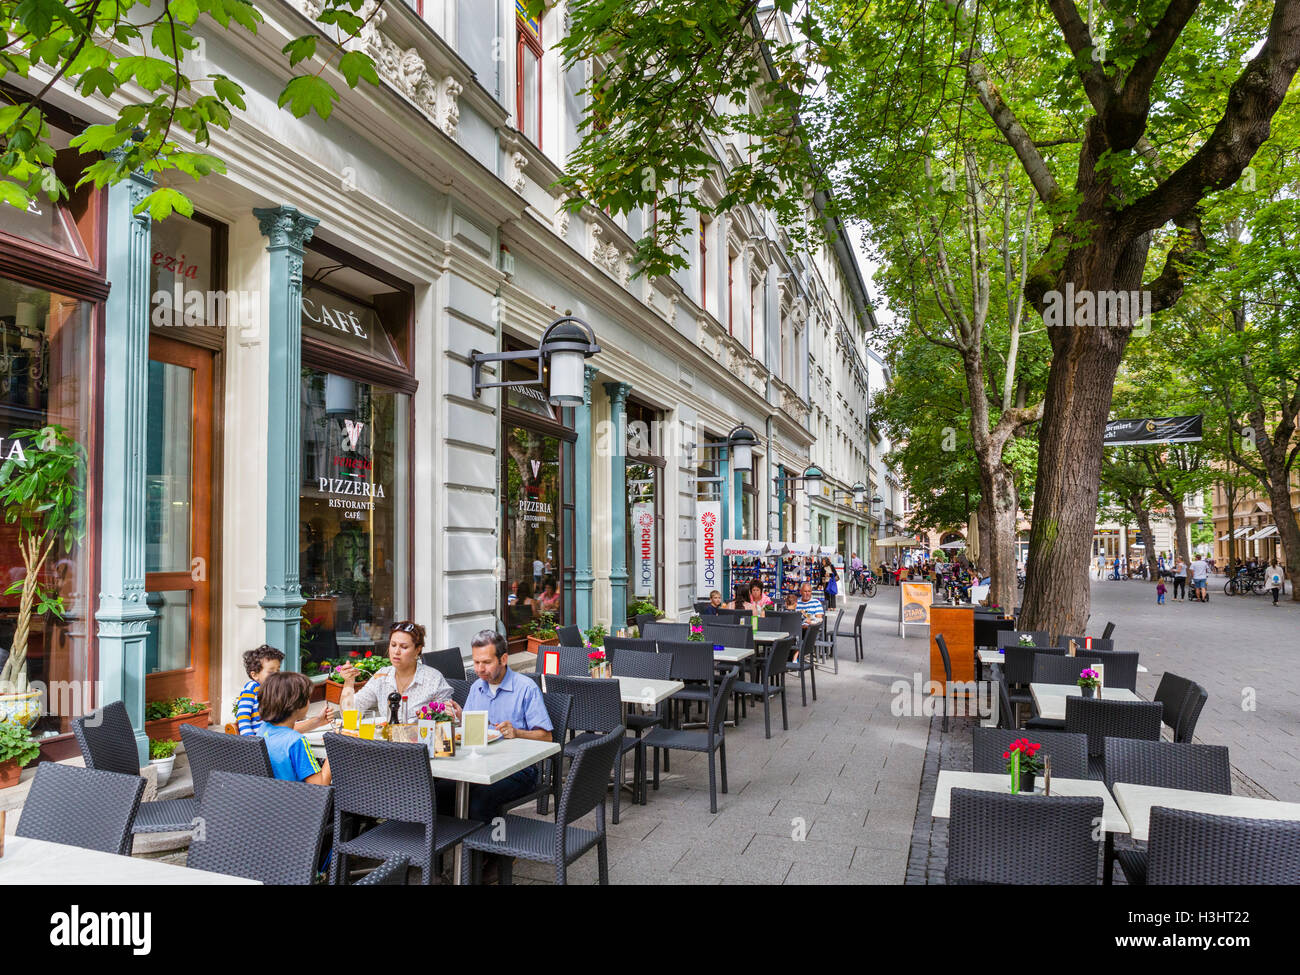 Sidewalk cafe on Schillerstrasse in the city centre, Weimar, Thuringia, Germany Stock Photo